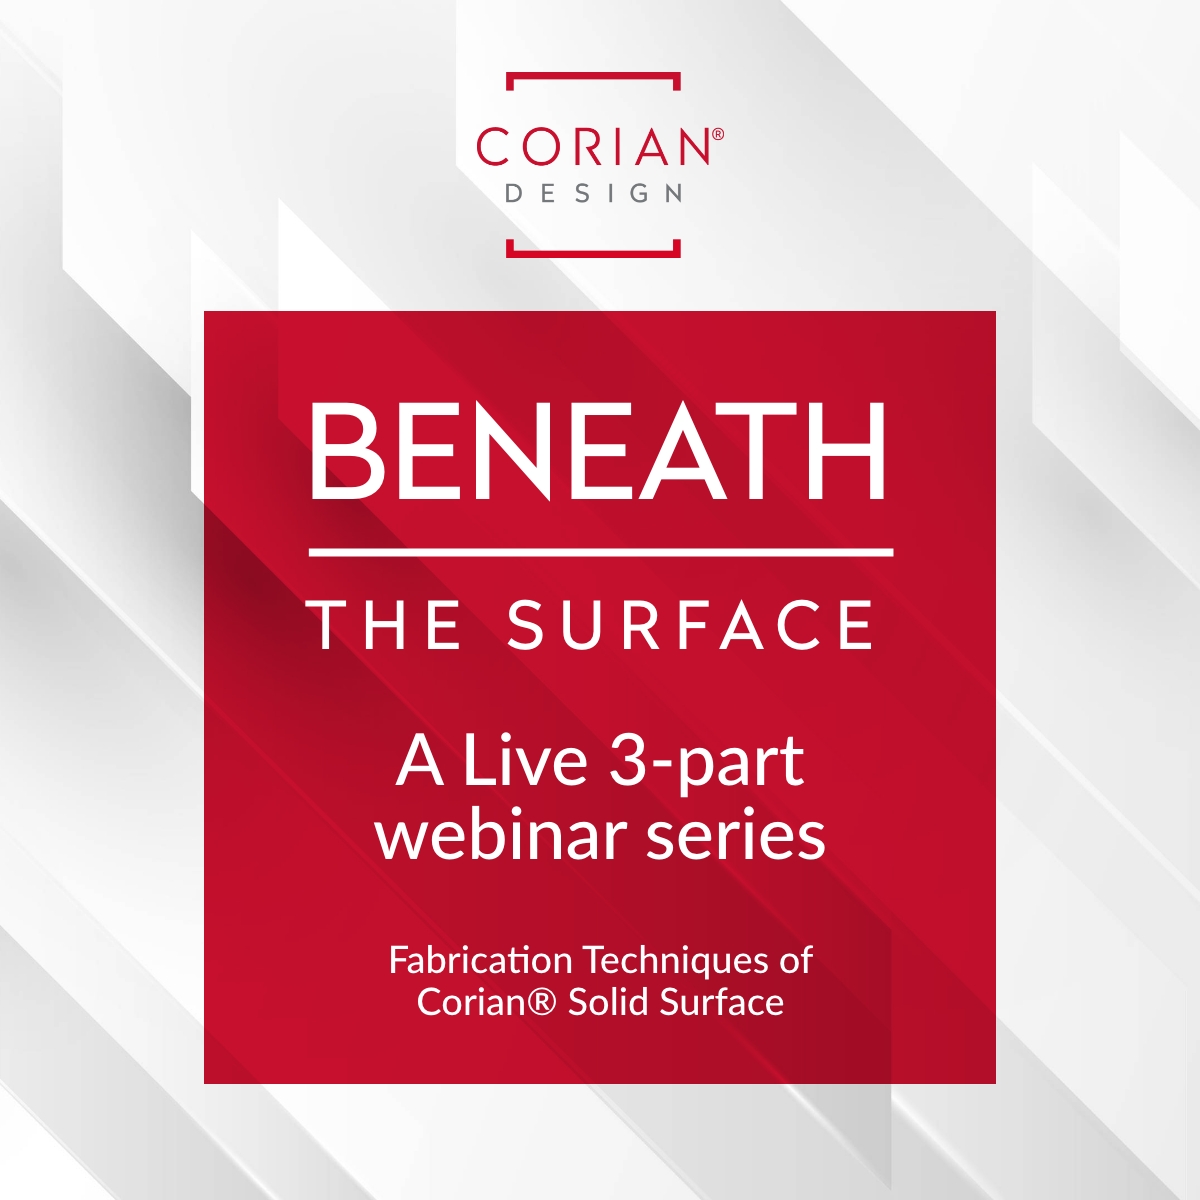 Happy New Year! We're back with part 2 of BENEATH THE SURFACE: Next-Level Techniques for Corian® Solid Surface, which will be on Jan 30, 2024, at 1:00 PM ET. Learn more and register at ISFAnow.org! #ISFAnow #ForFabricators #ISFAwebinar #Corian #Beneaththesurface